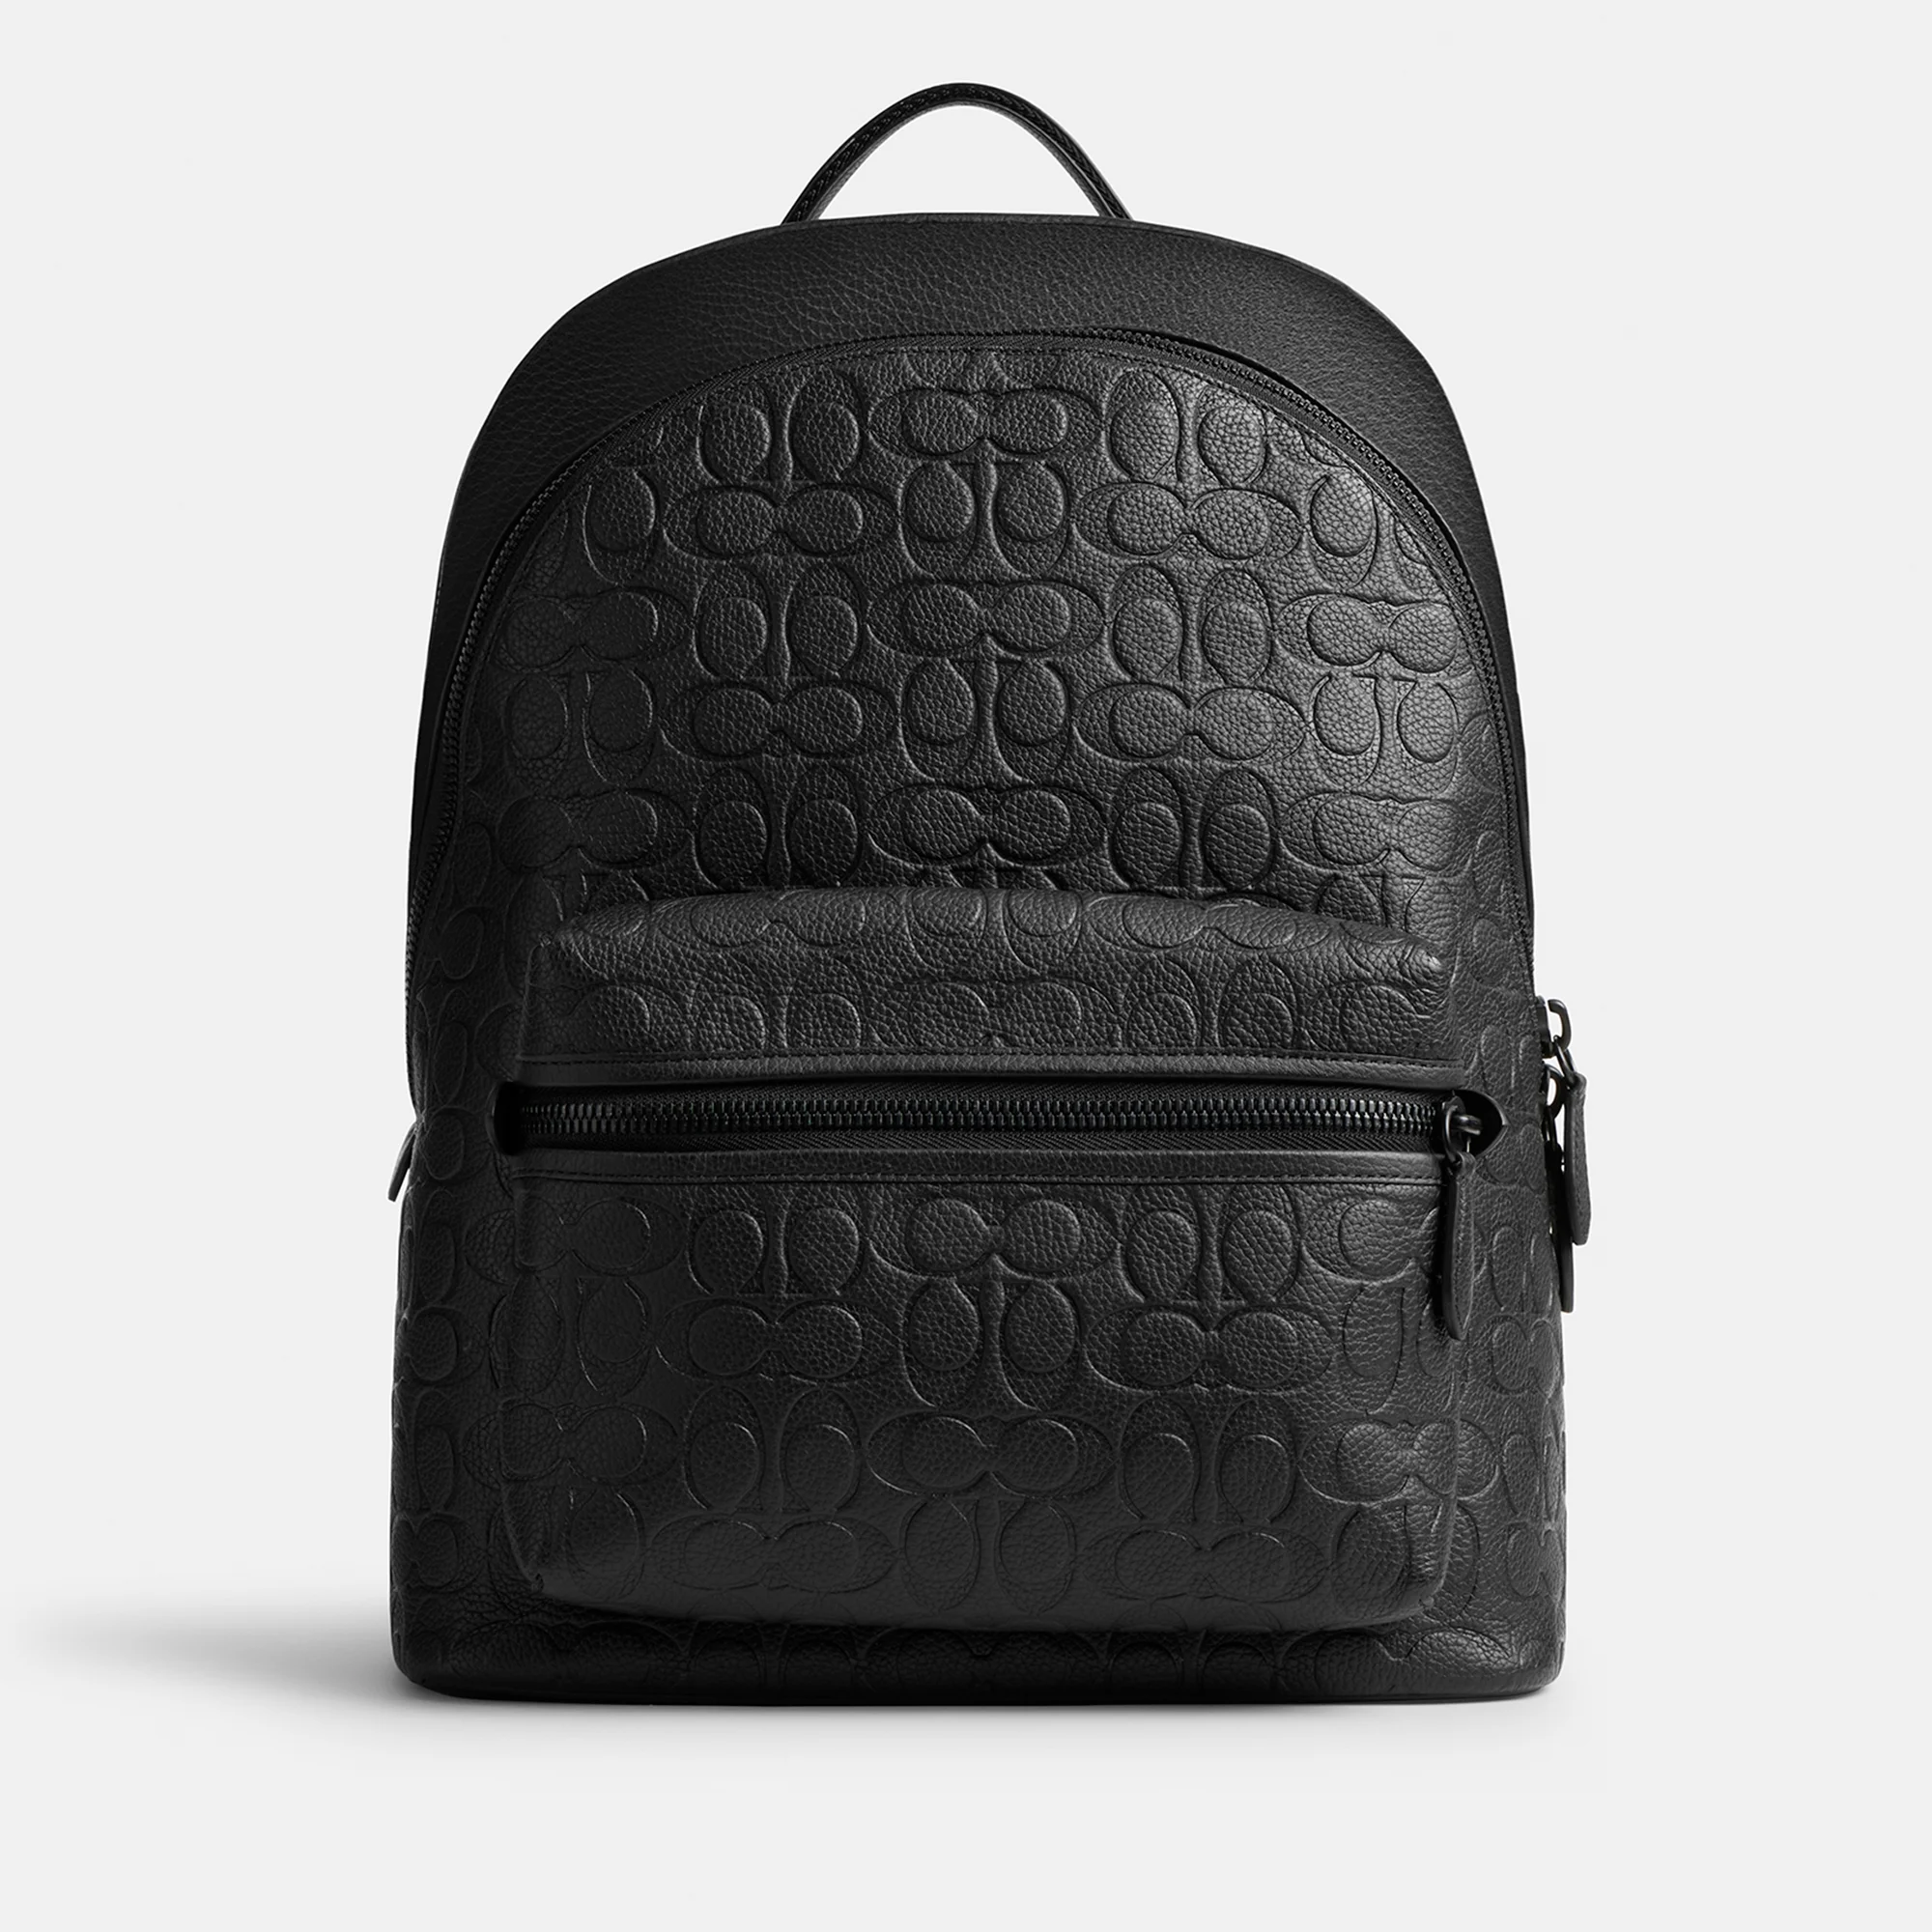 Coach Charter Signature Debossed Pebble Leather Backpack Image 1